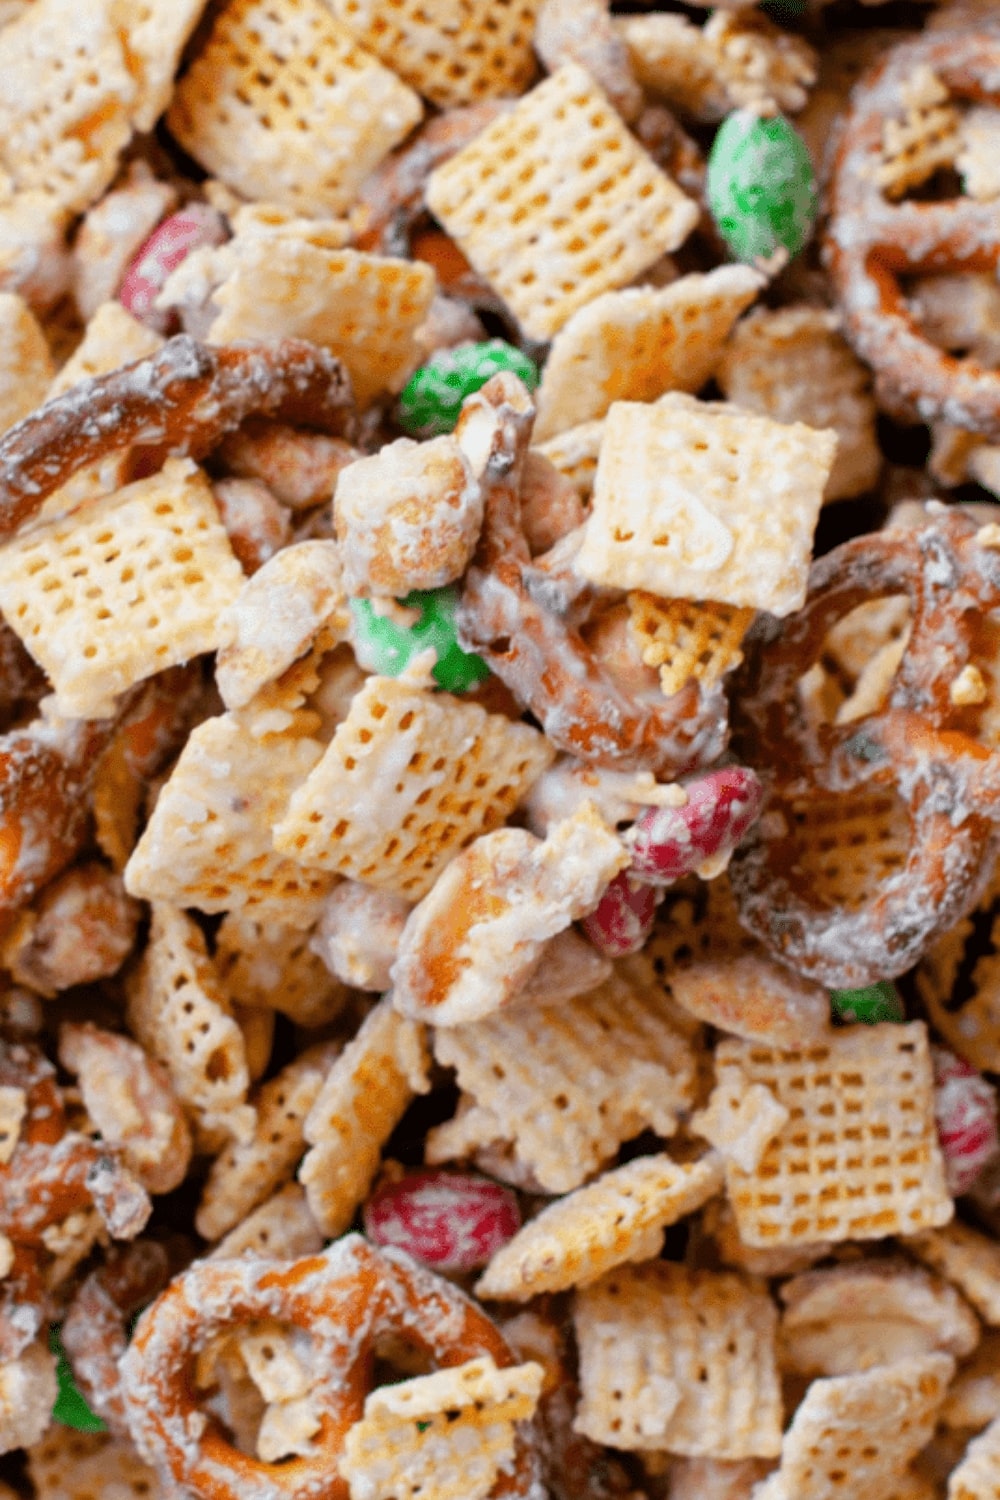 Mixture of Chex, pretzels, peanuts, and M&Ms, covered in melted white chocolate.